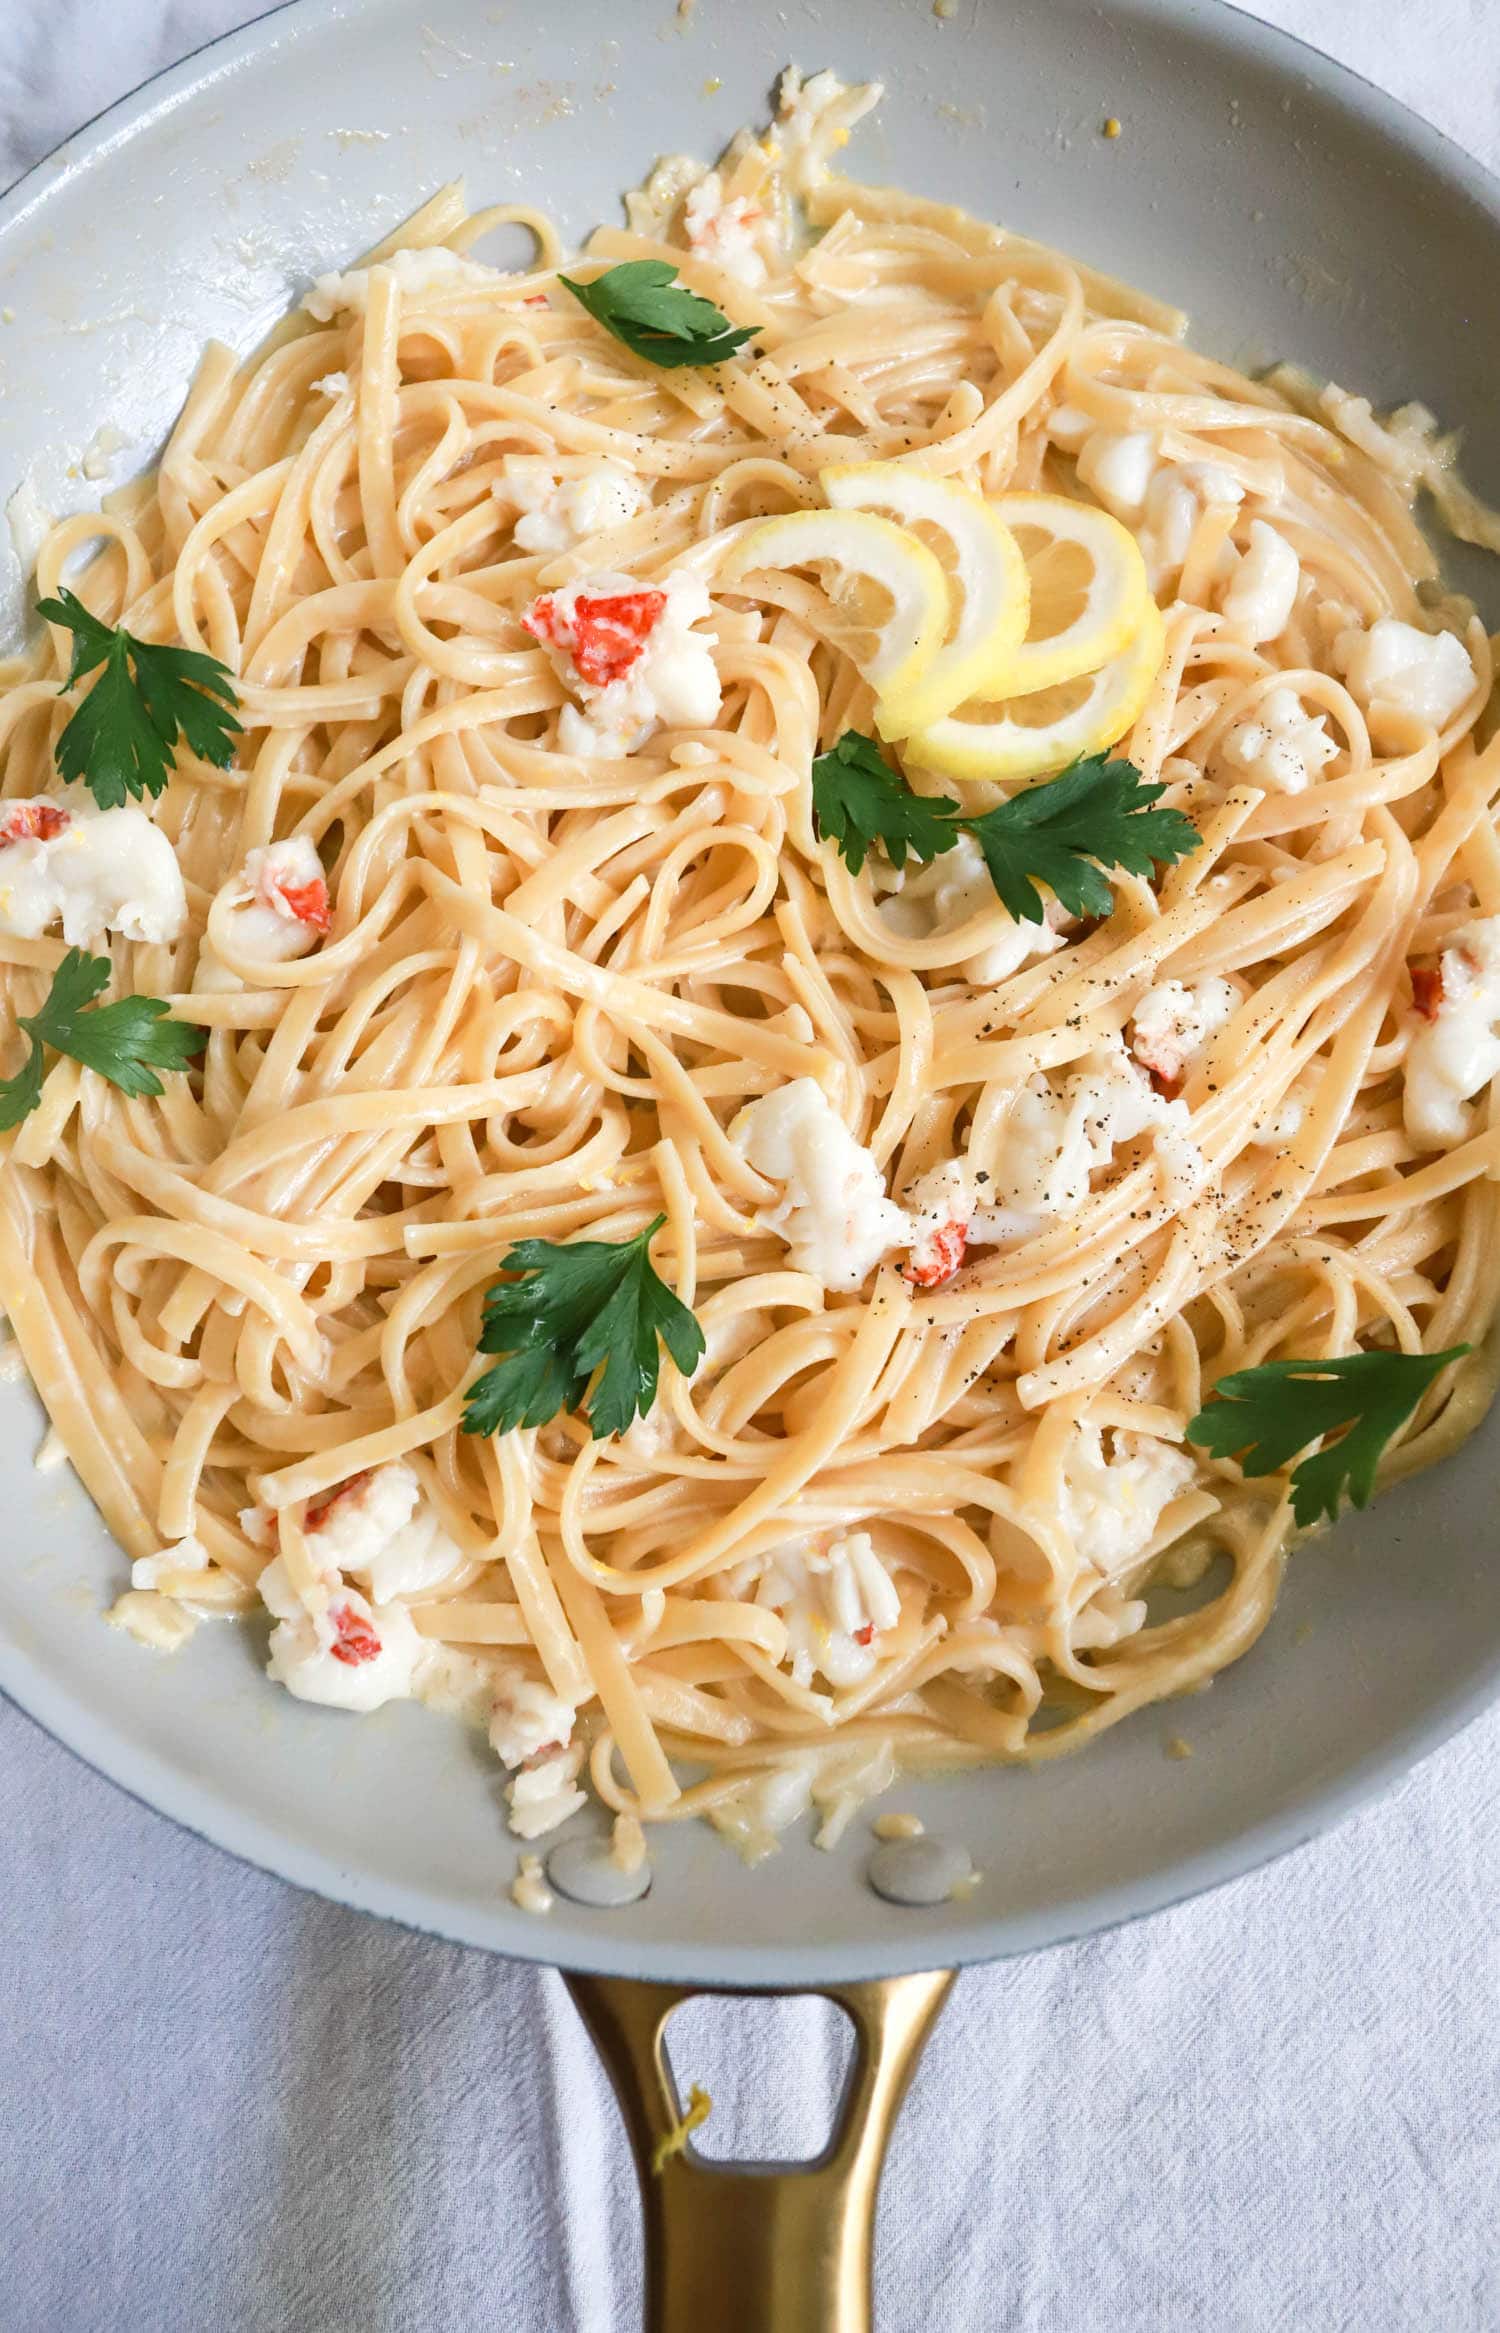 Skillet of lobster with pasta and lemon.